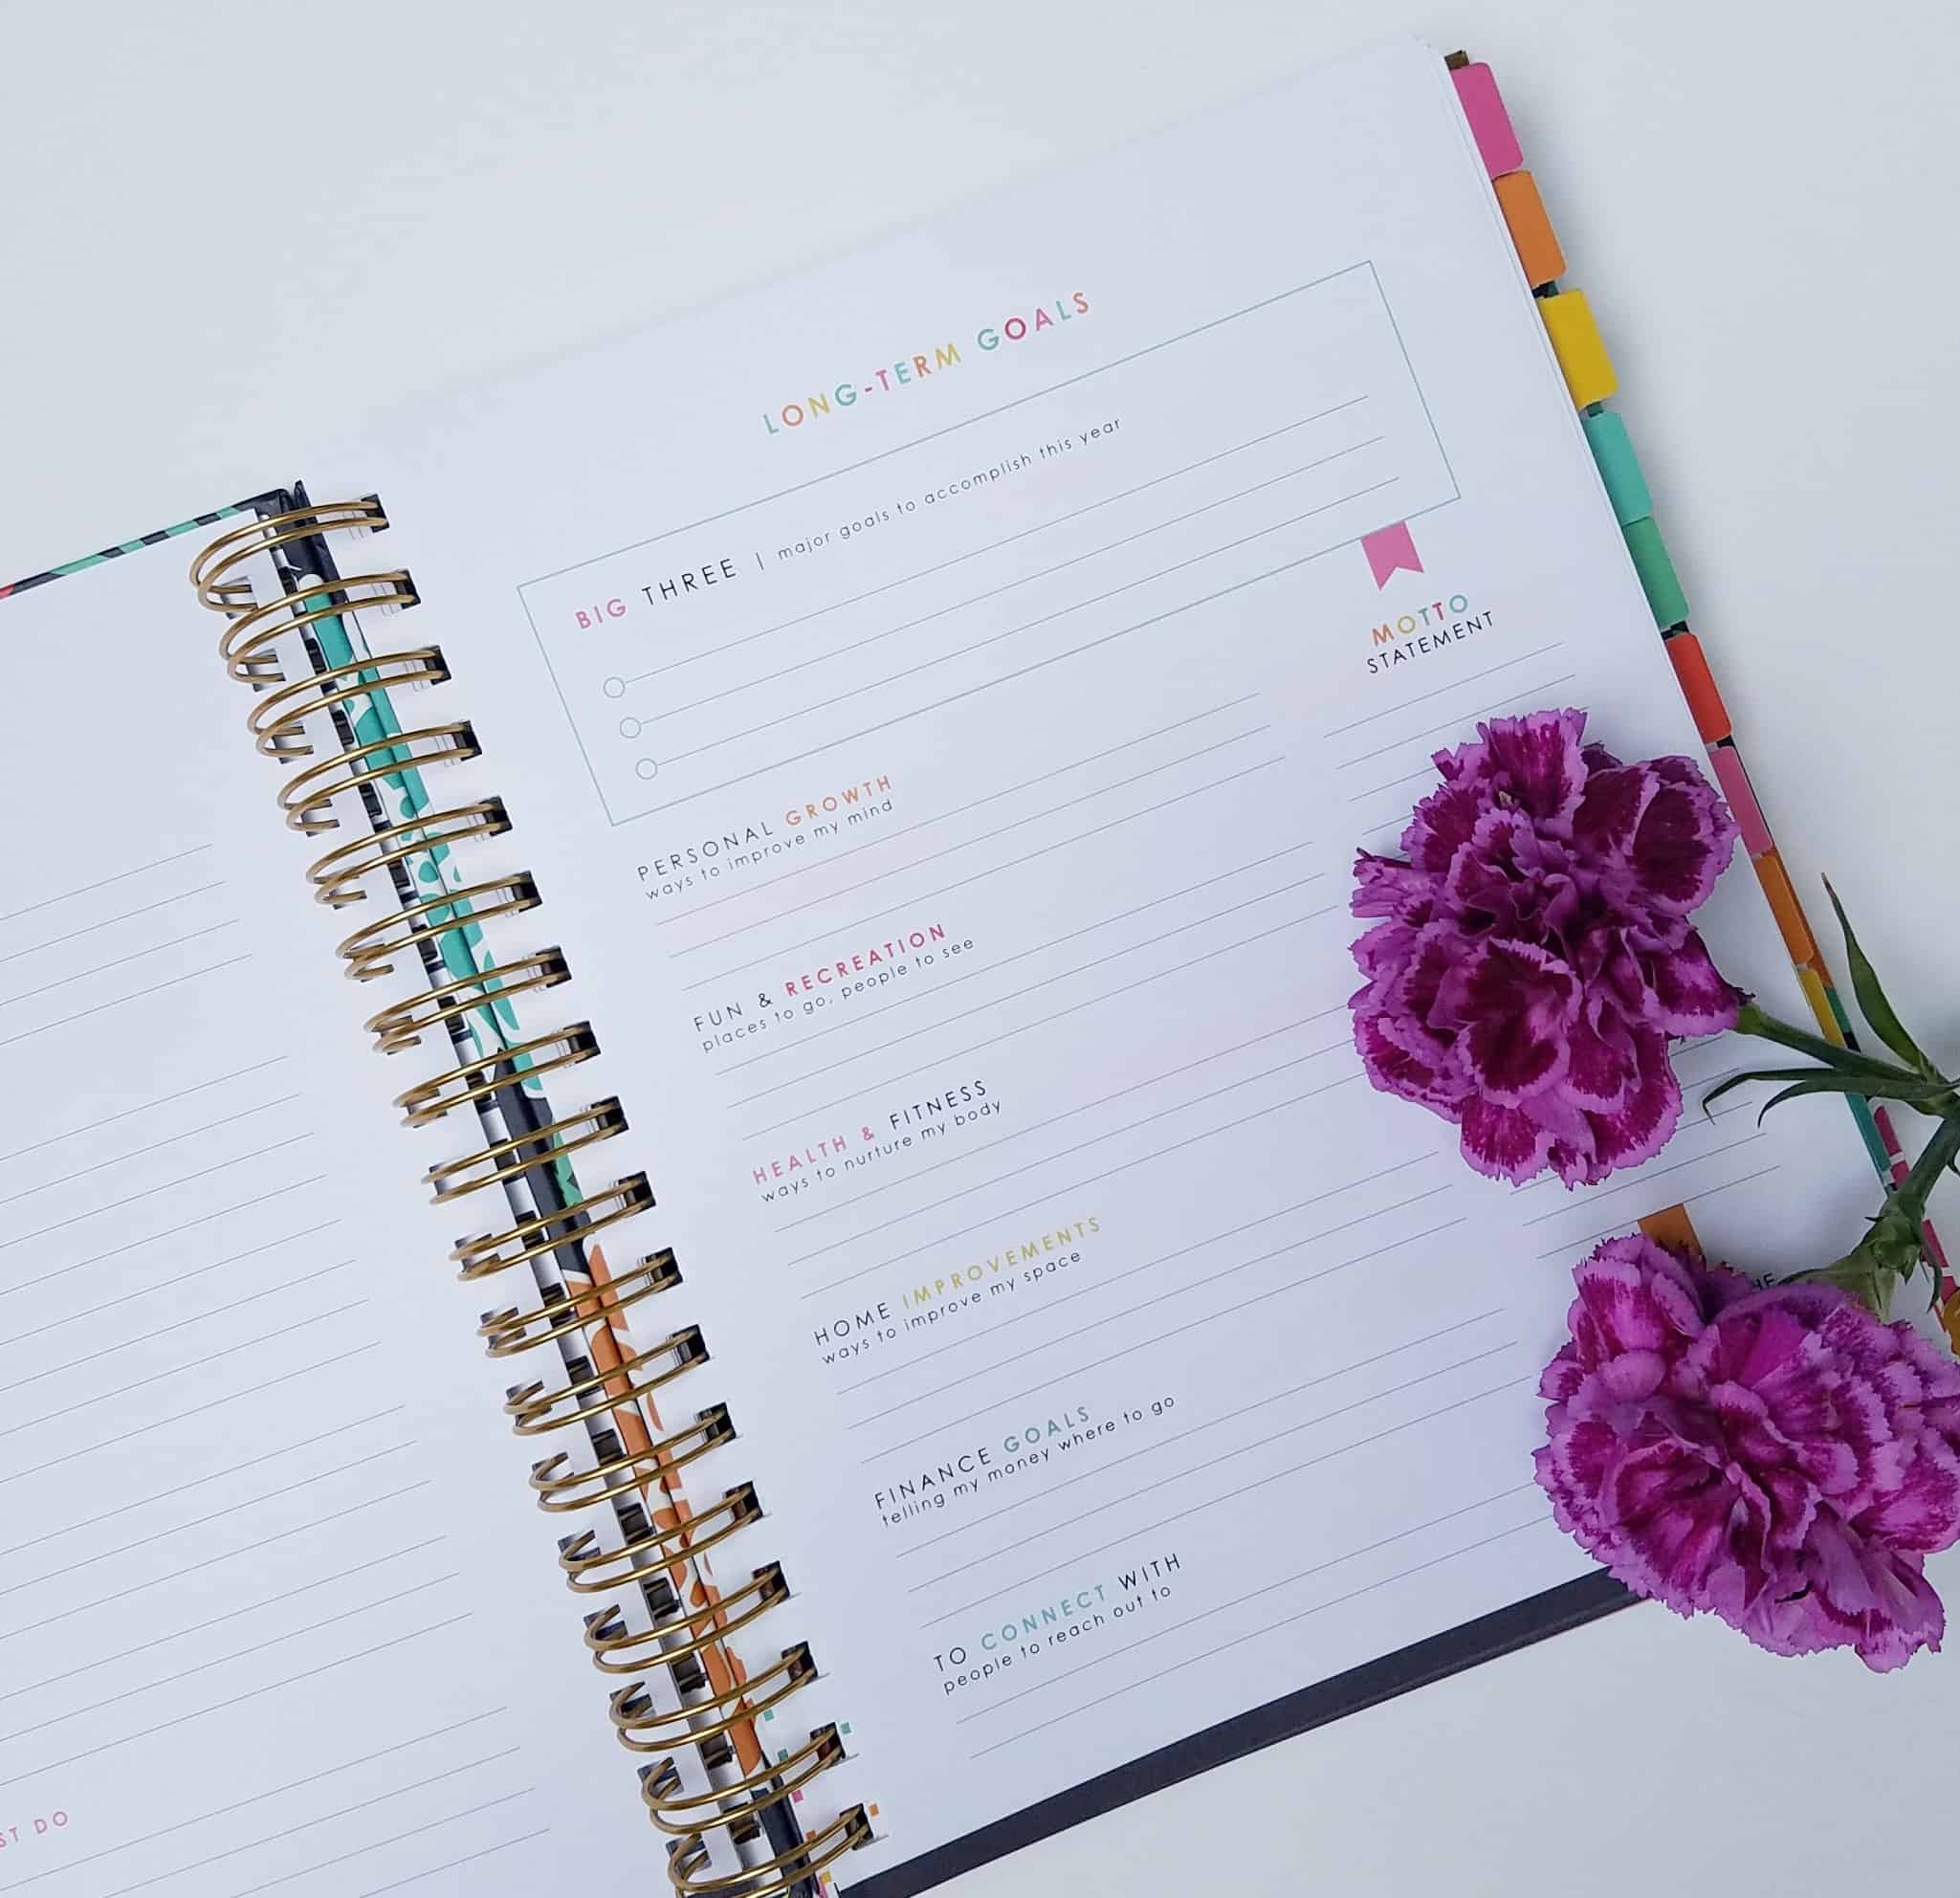 Ready to crush your goals and get your life in order? The Living Well Planner has helped me do just that time and time again!